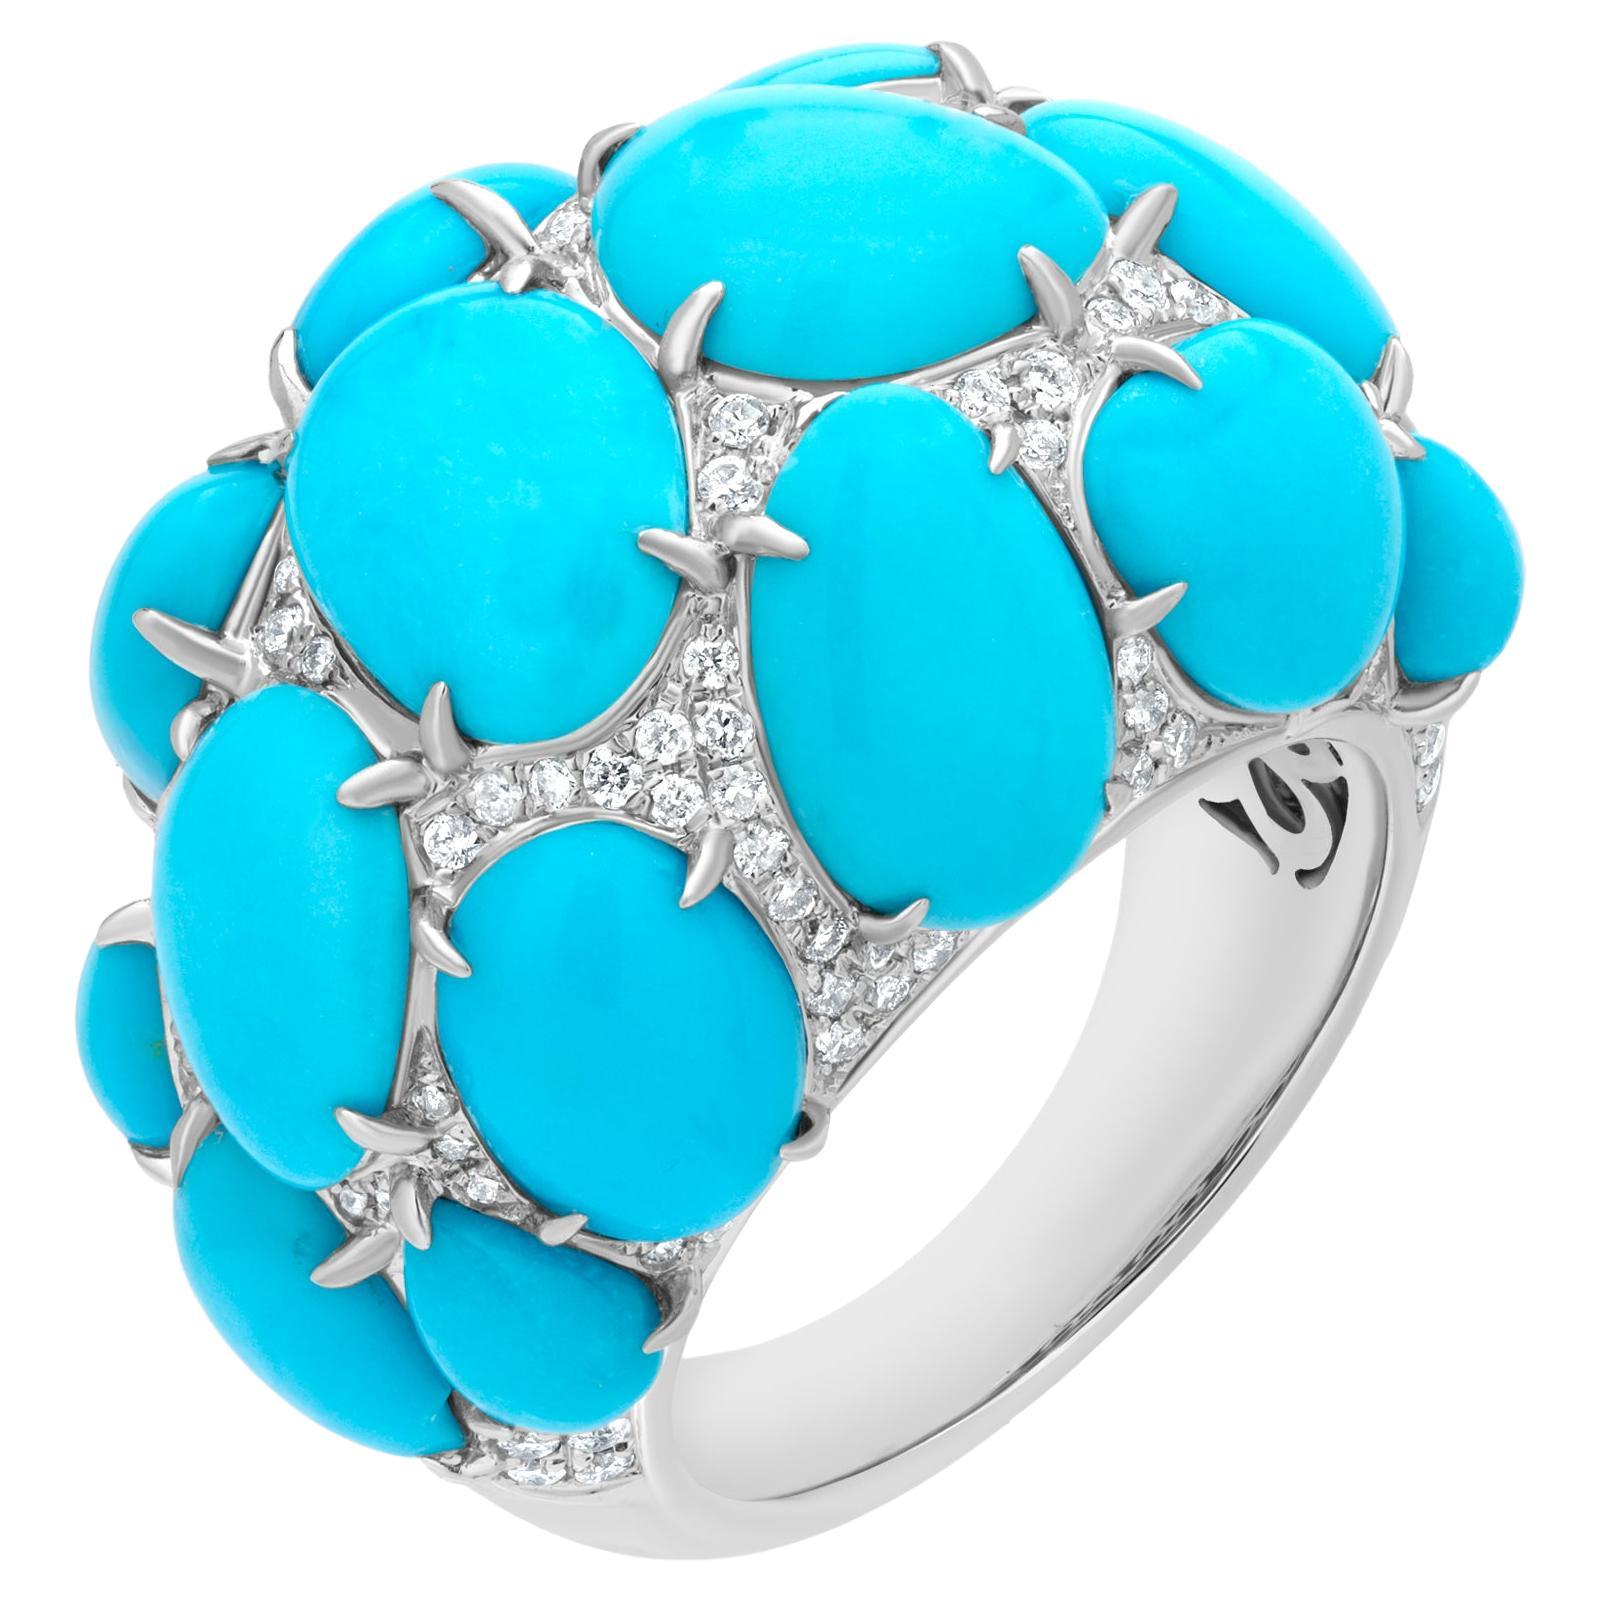 Gemistry 14.97 Cttw. Turquoise and Diamond Cluster Dome Ring in 18k White Gold